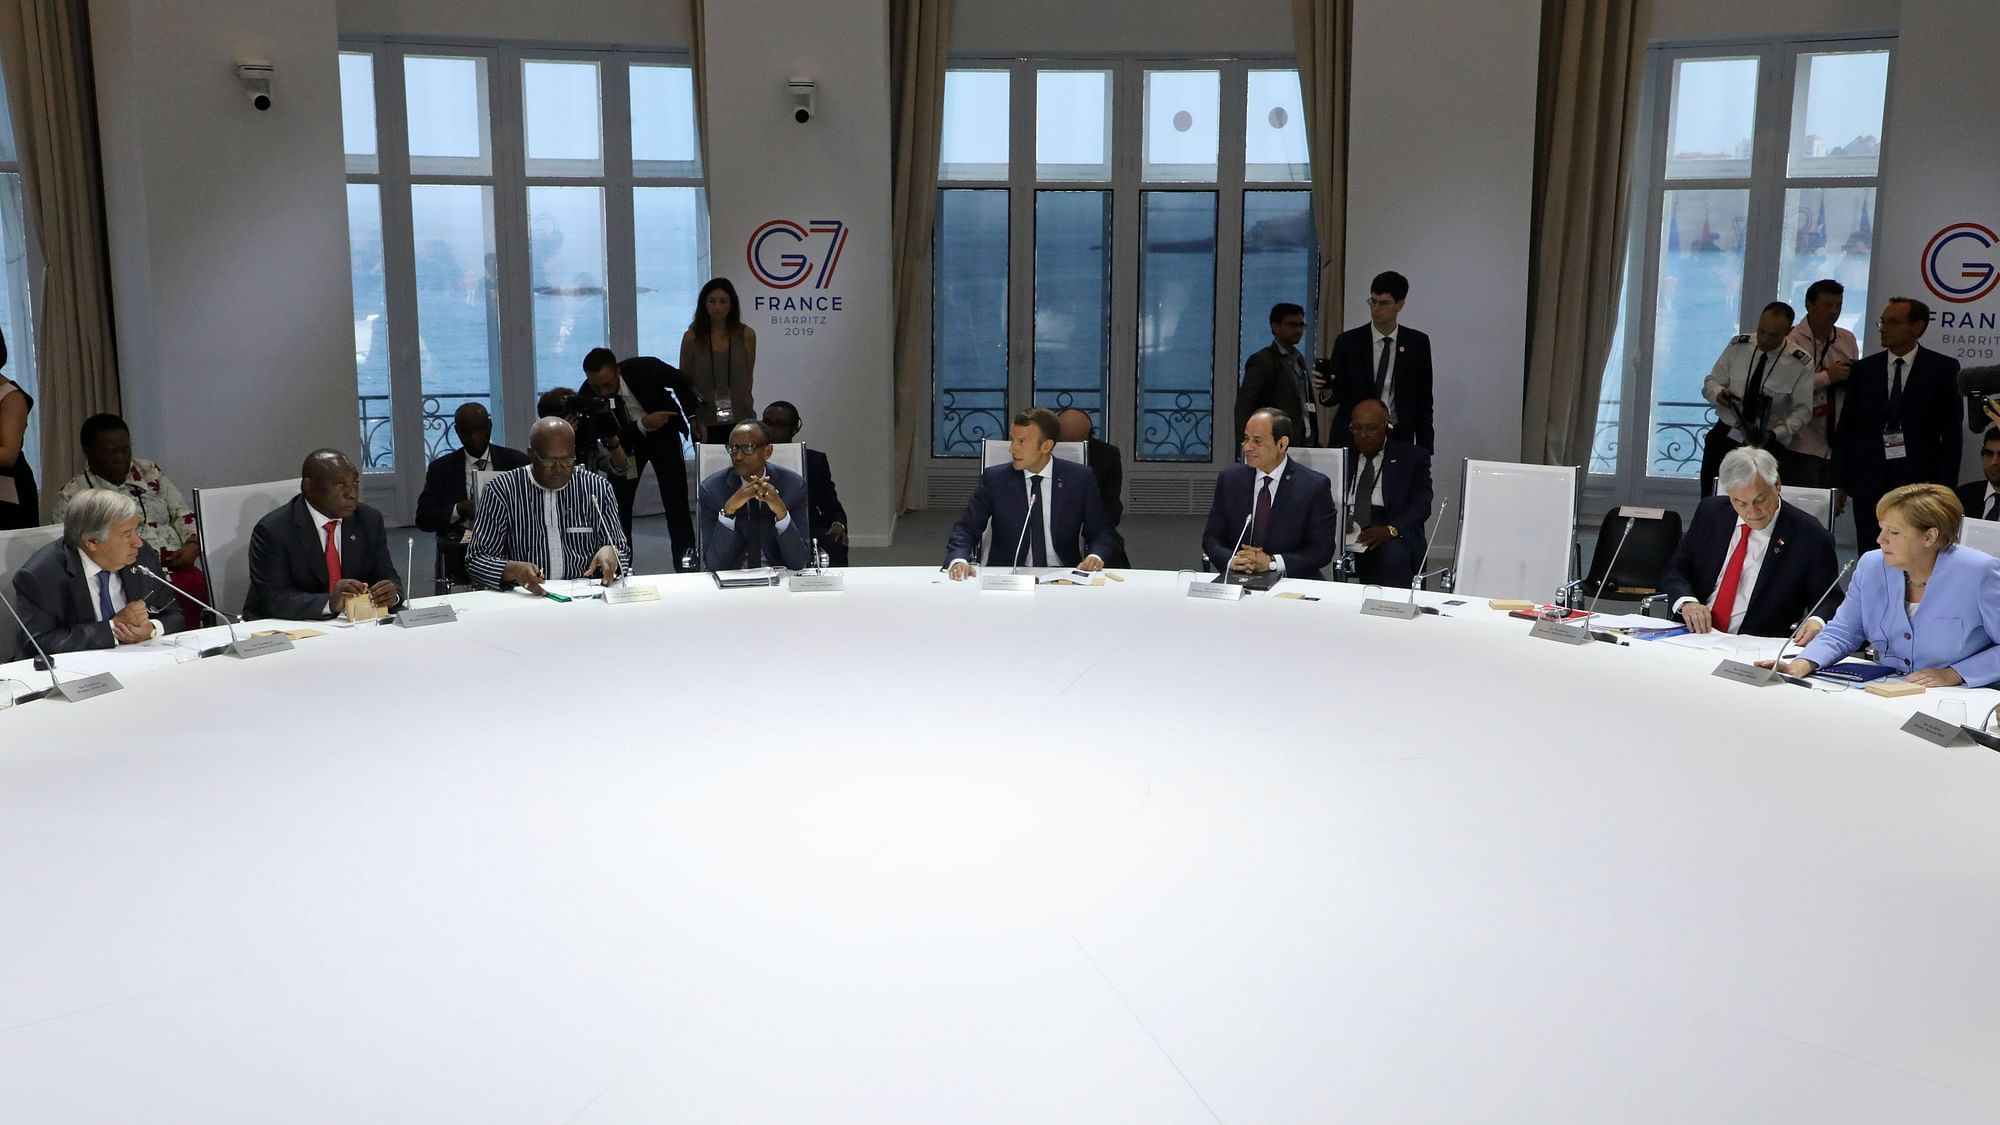 Trump left an empty chair as global power brokers debated Monday how to help the fire-stricken Amazon and reduce carbon emissions.